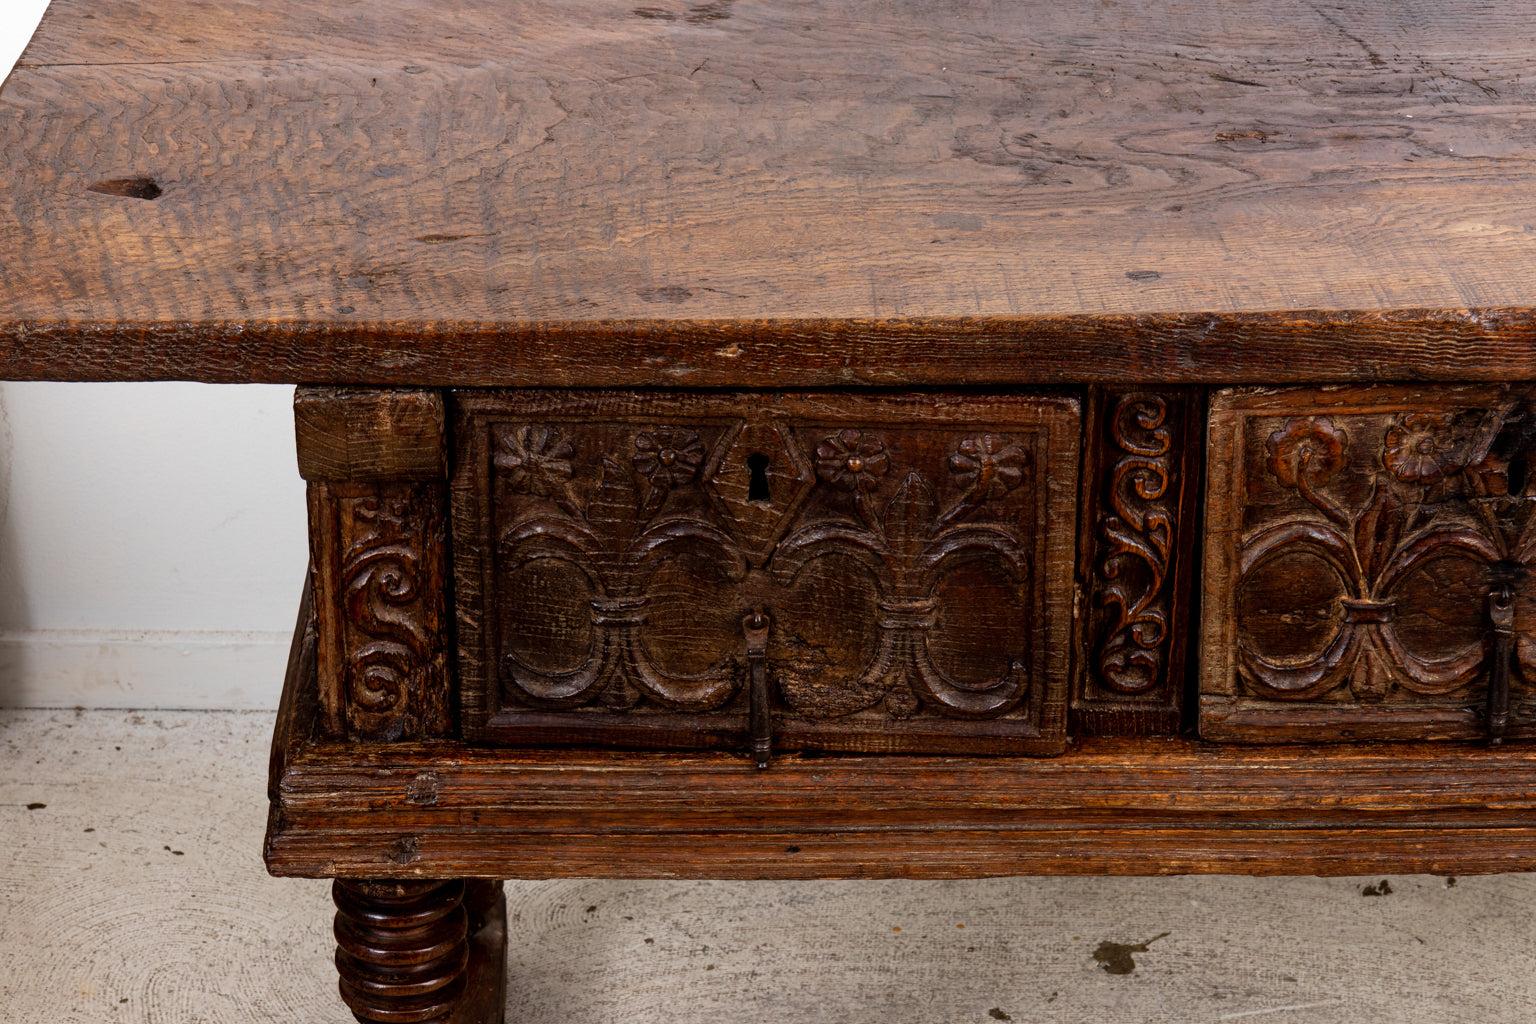 Circa 1690s three drawer table in the Baroque style from the late 17th century with metal hardware. The table is carved throughout with geometric shaped panels, floral motifs, and smaller s-scroll panels. The table is supported by vase-and-ring